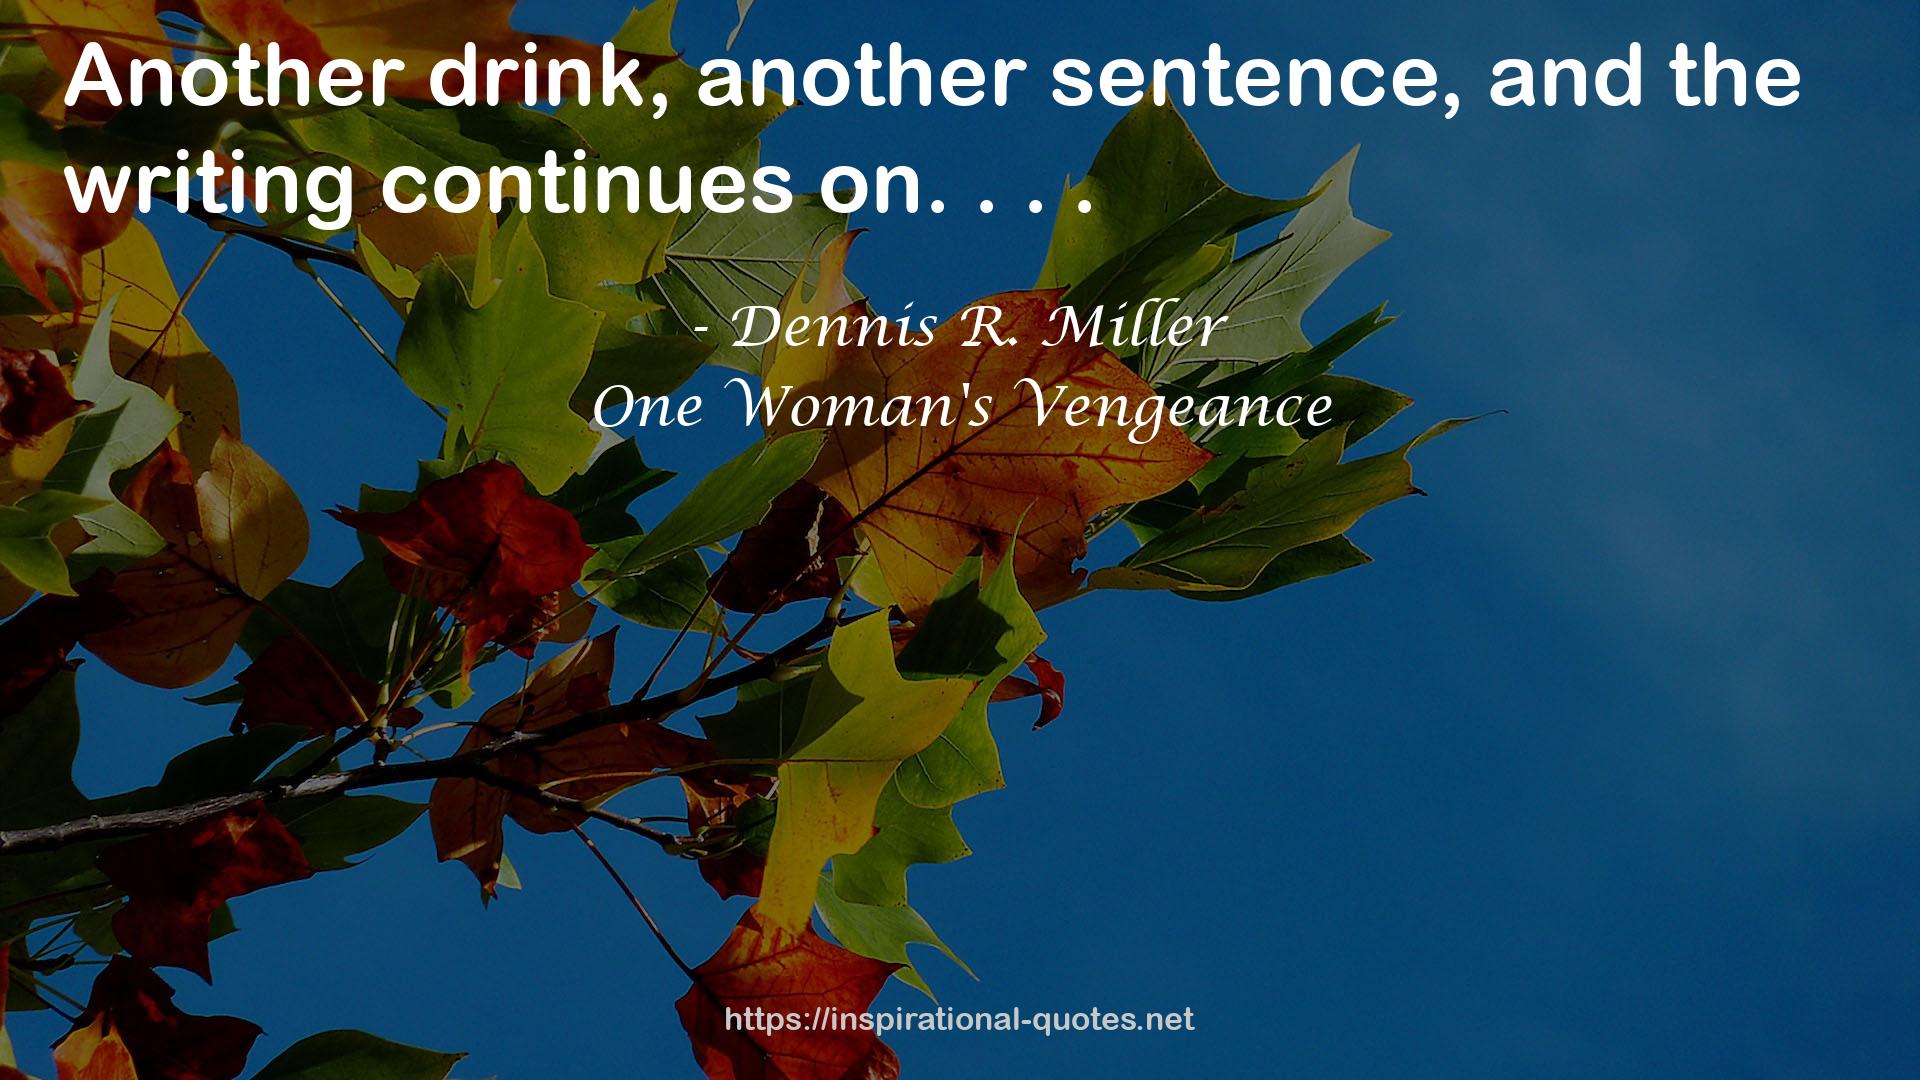 One Woman's Vengeance QUOTES